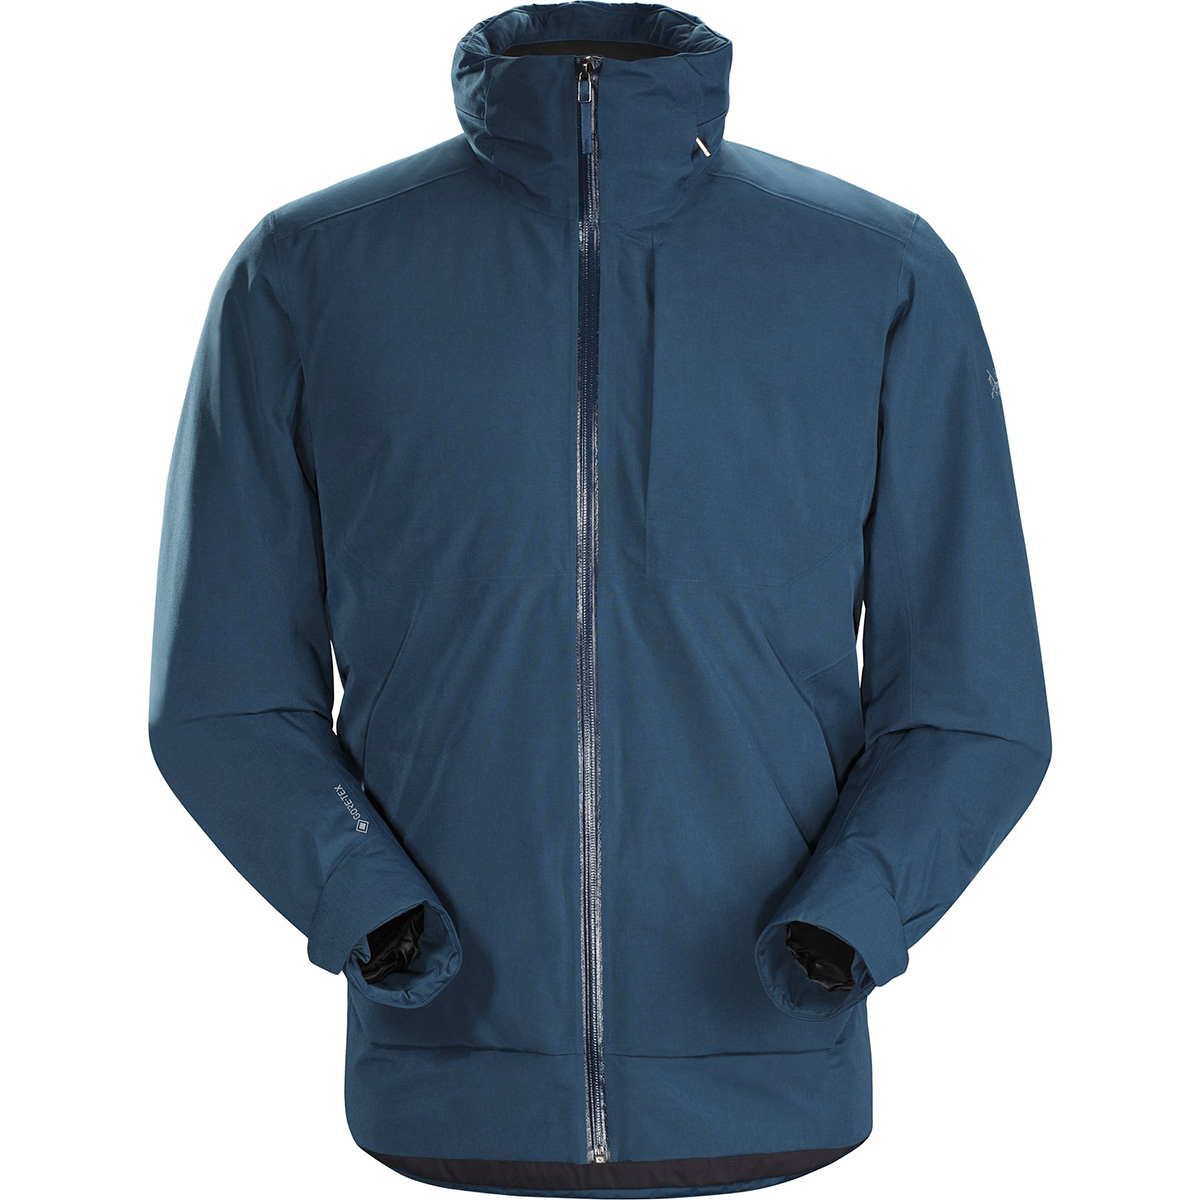 Arc'teryx Ames Jacket, men's, discontinued Fall 2019 model (free ground ...